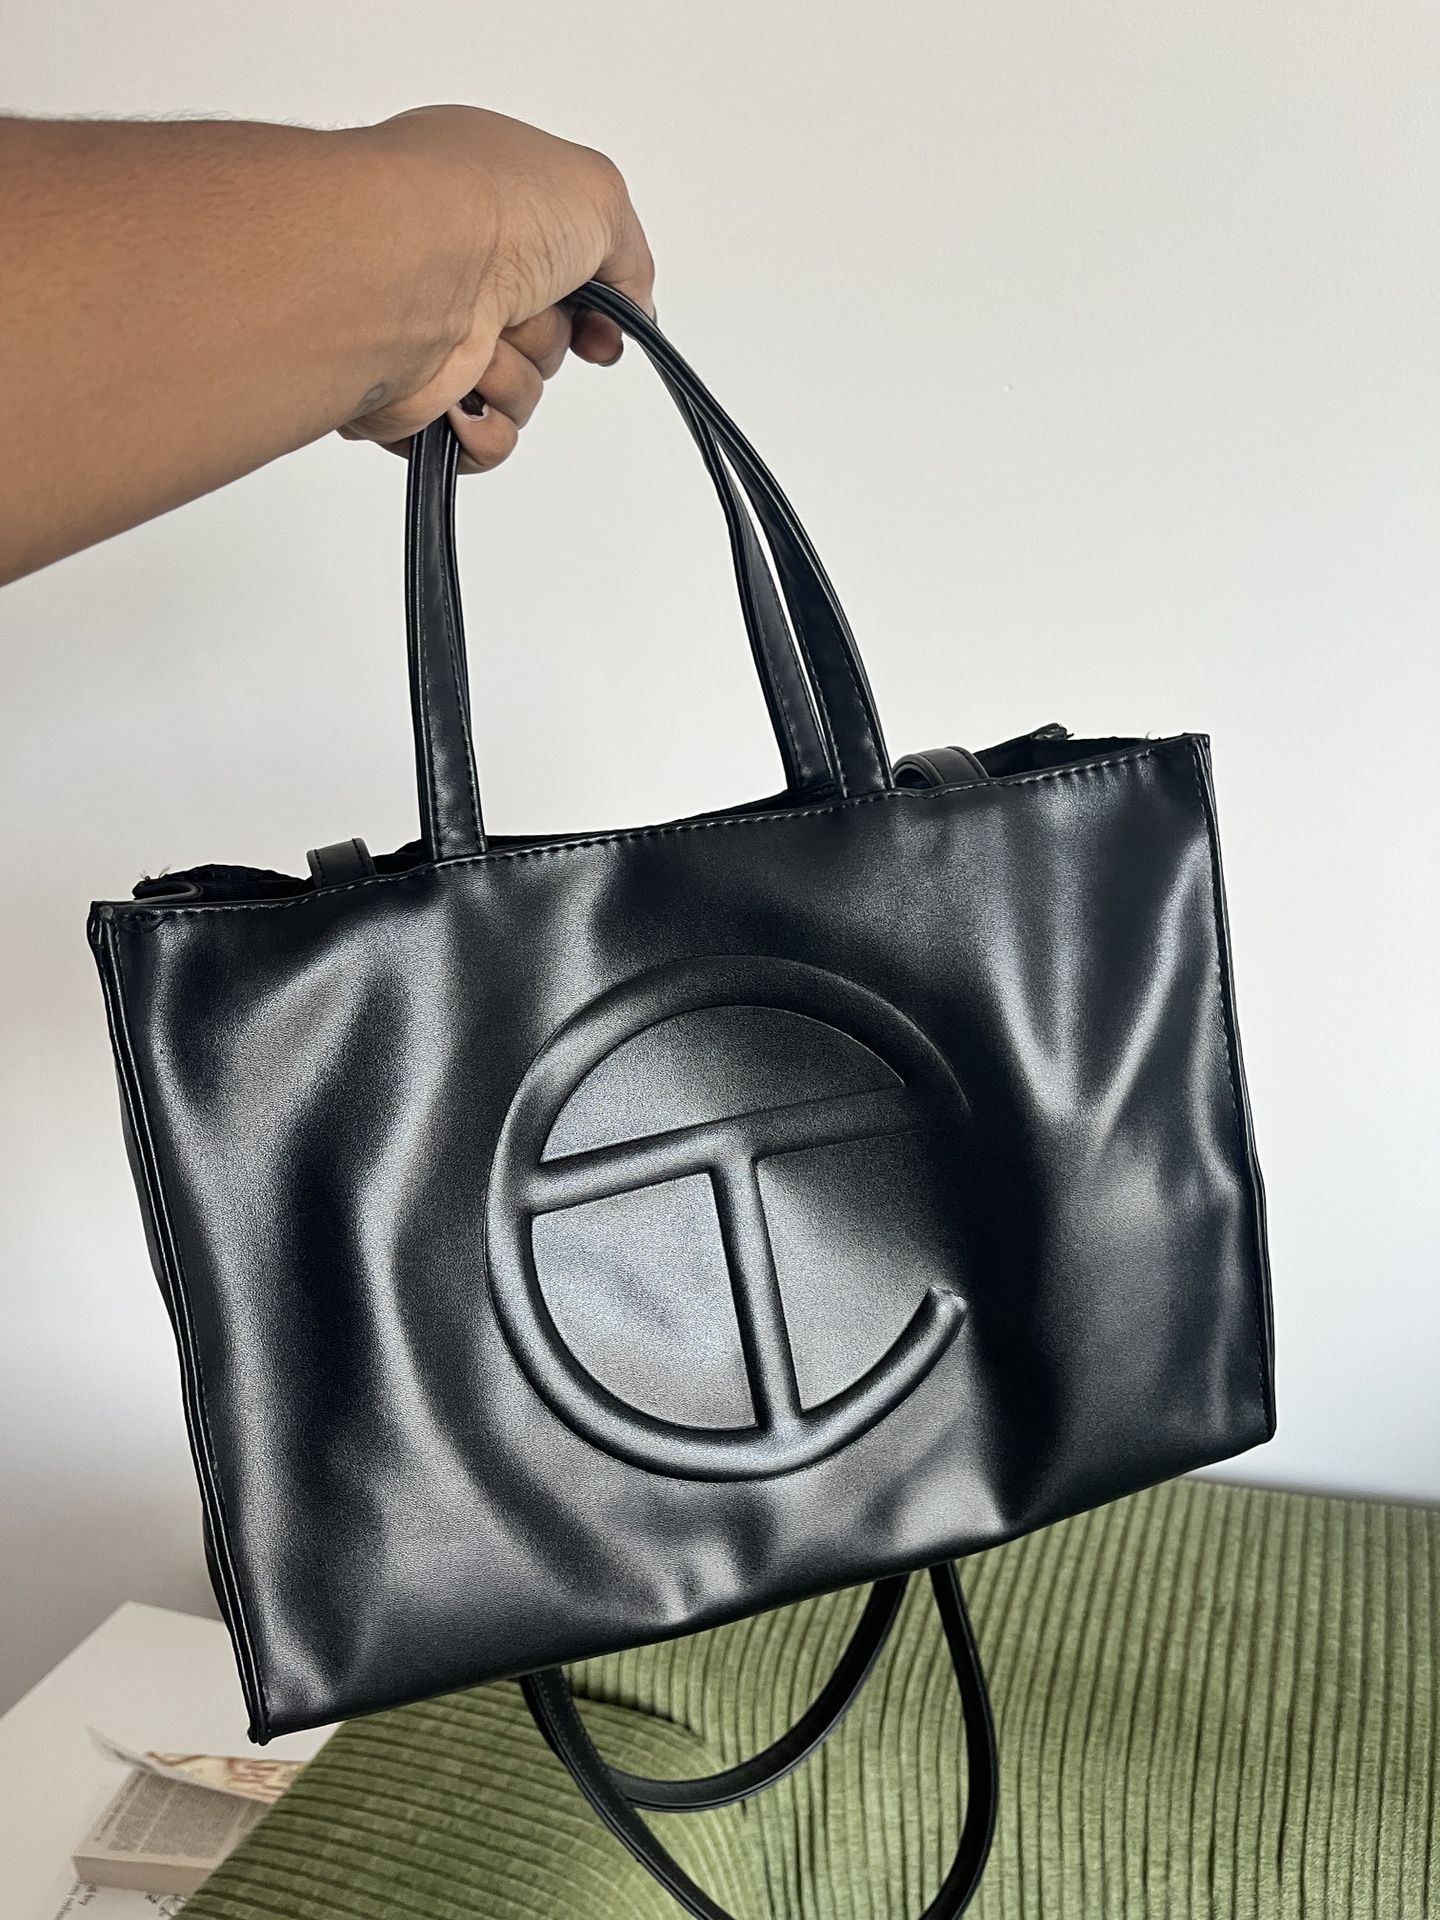 Telfar Medium Shopping Bag Black PRICE FIRM TRUSTED SELLER for Sale in  Queens, NY - OfferUp